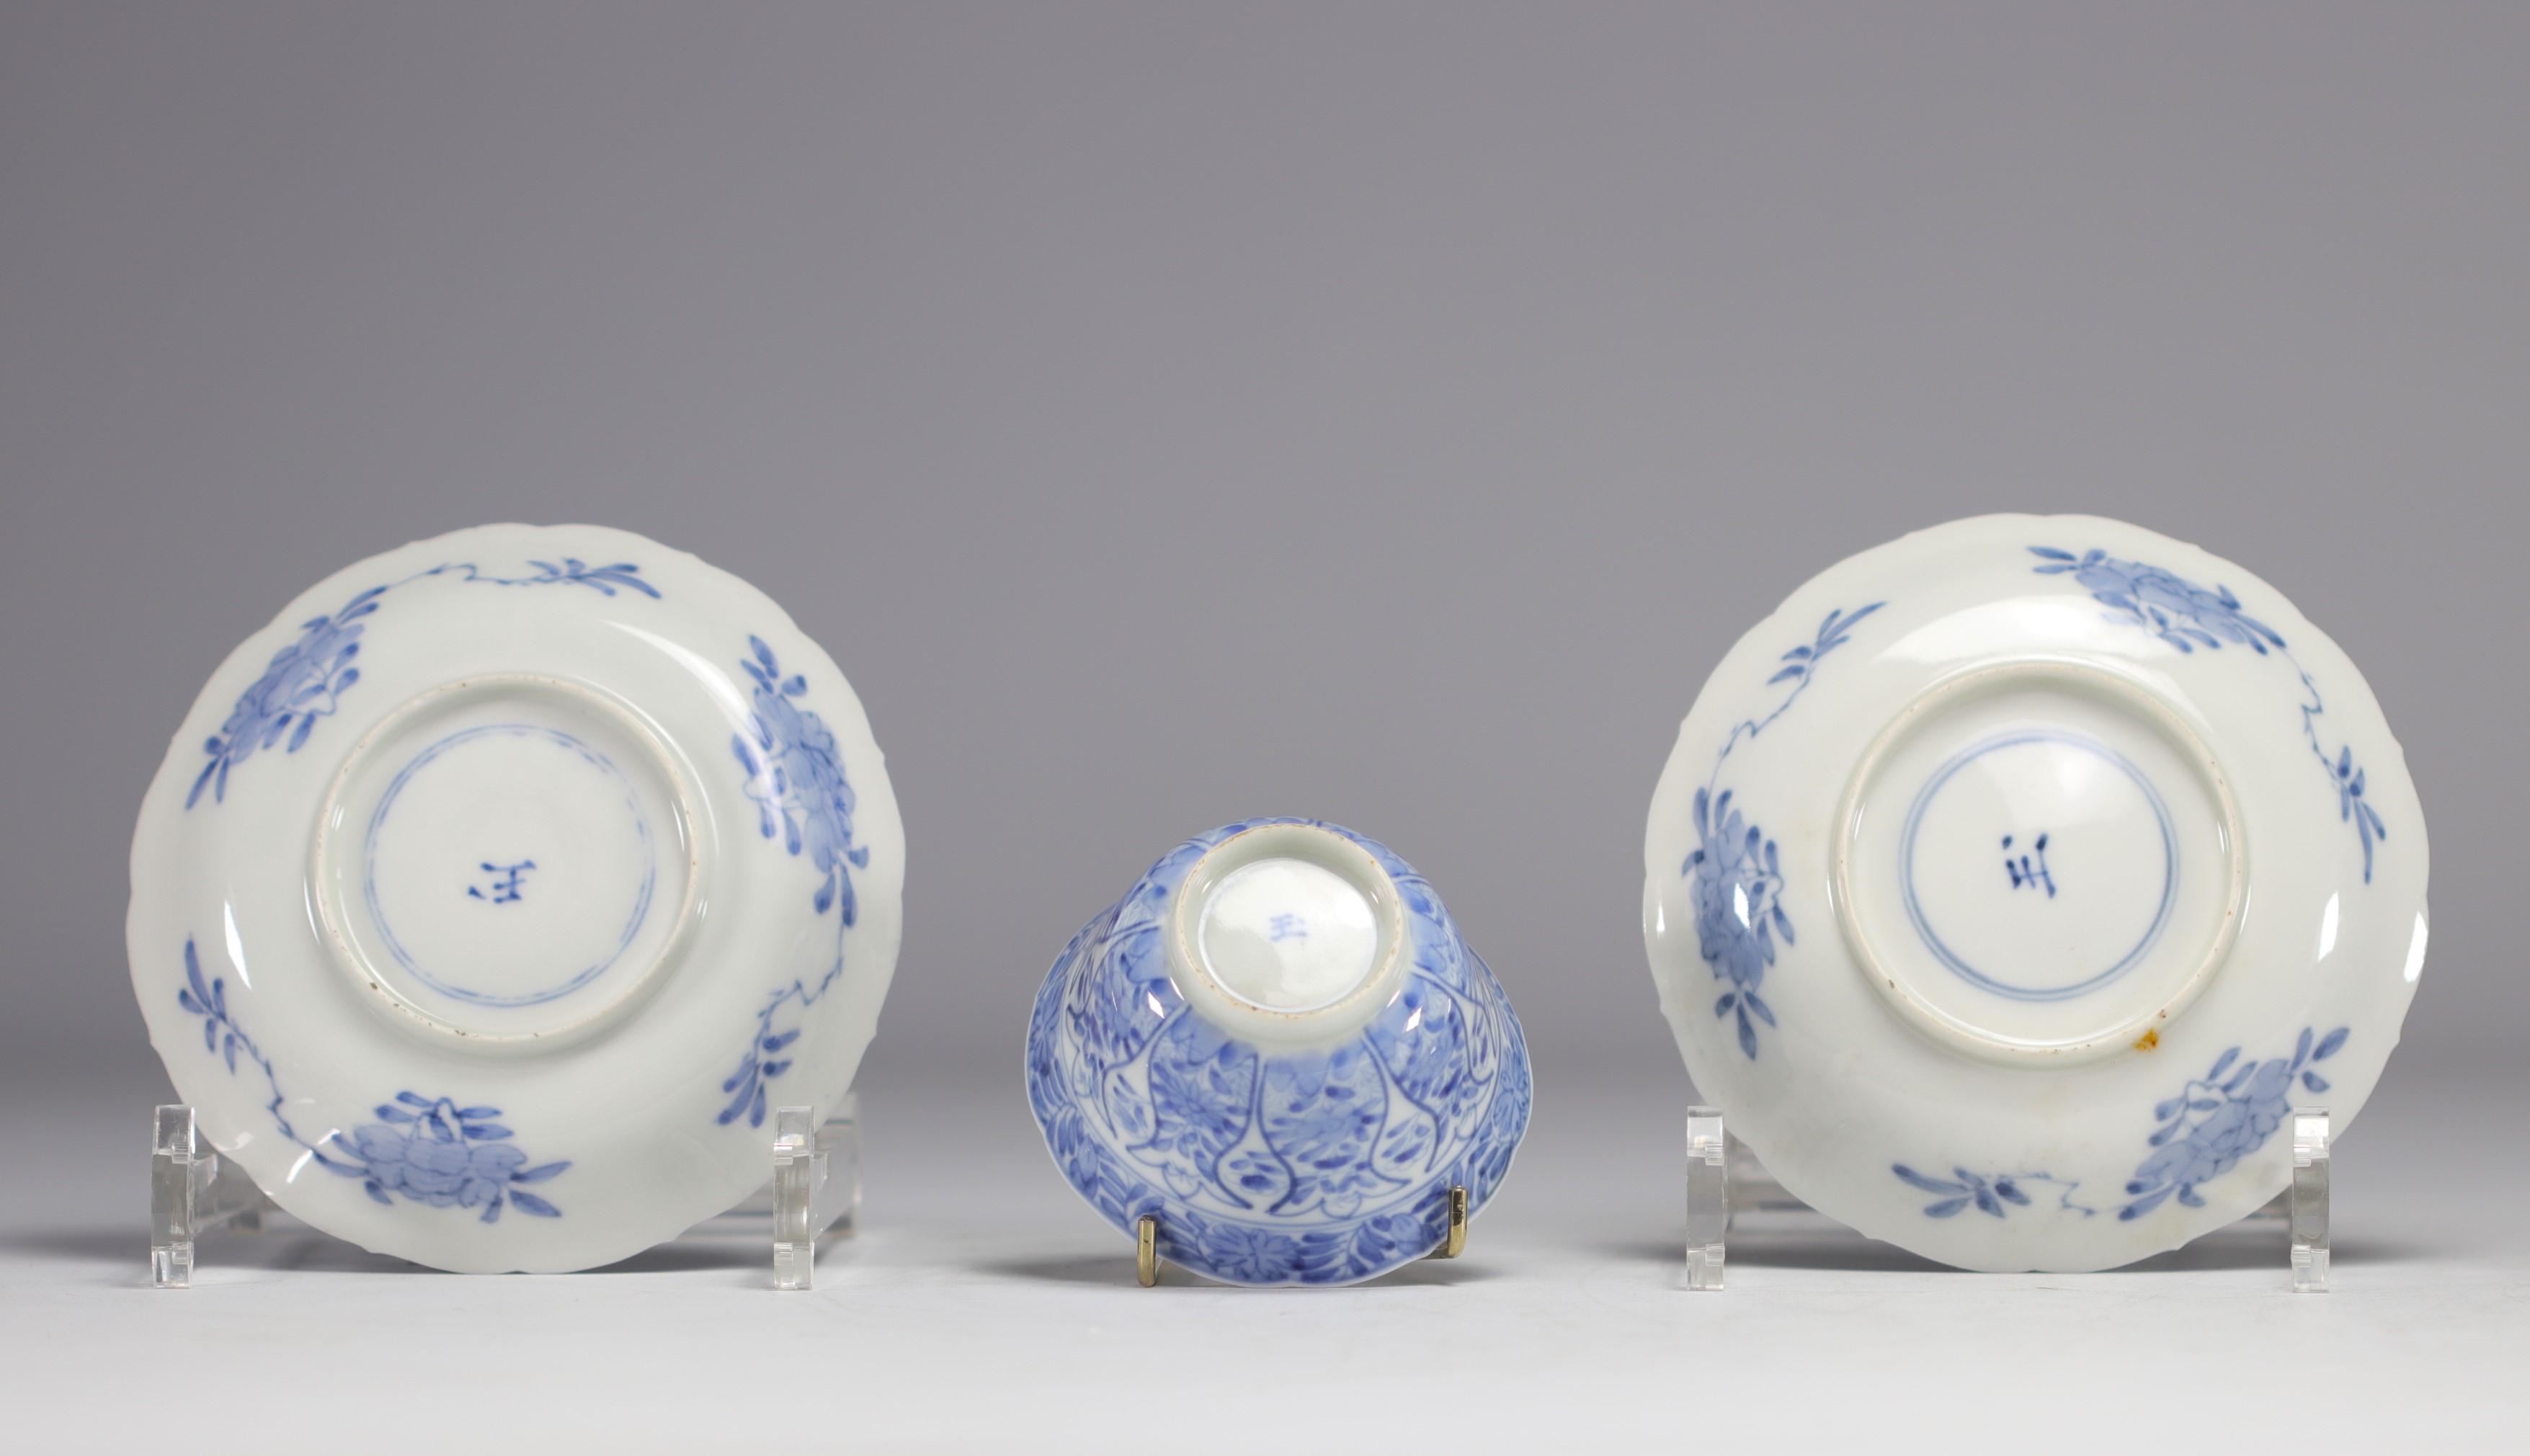 Set of white and blue bowls and saucers with various flower decorations from 18th century - Image 6 of 6